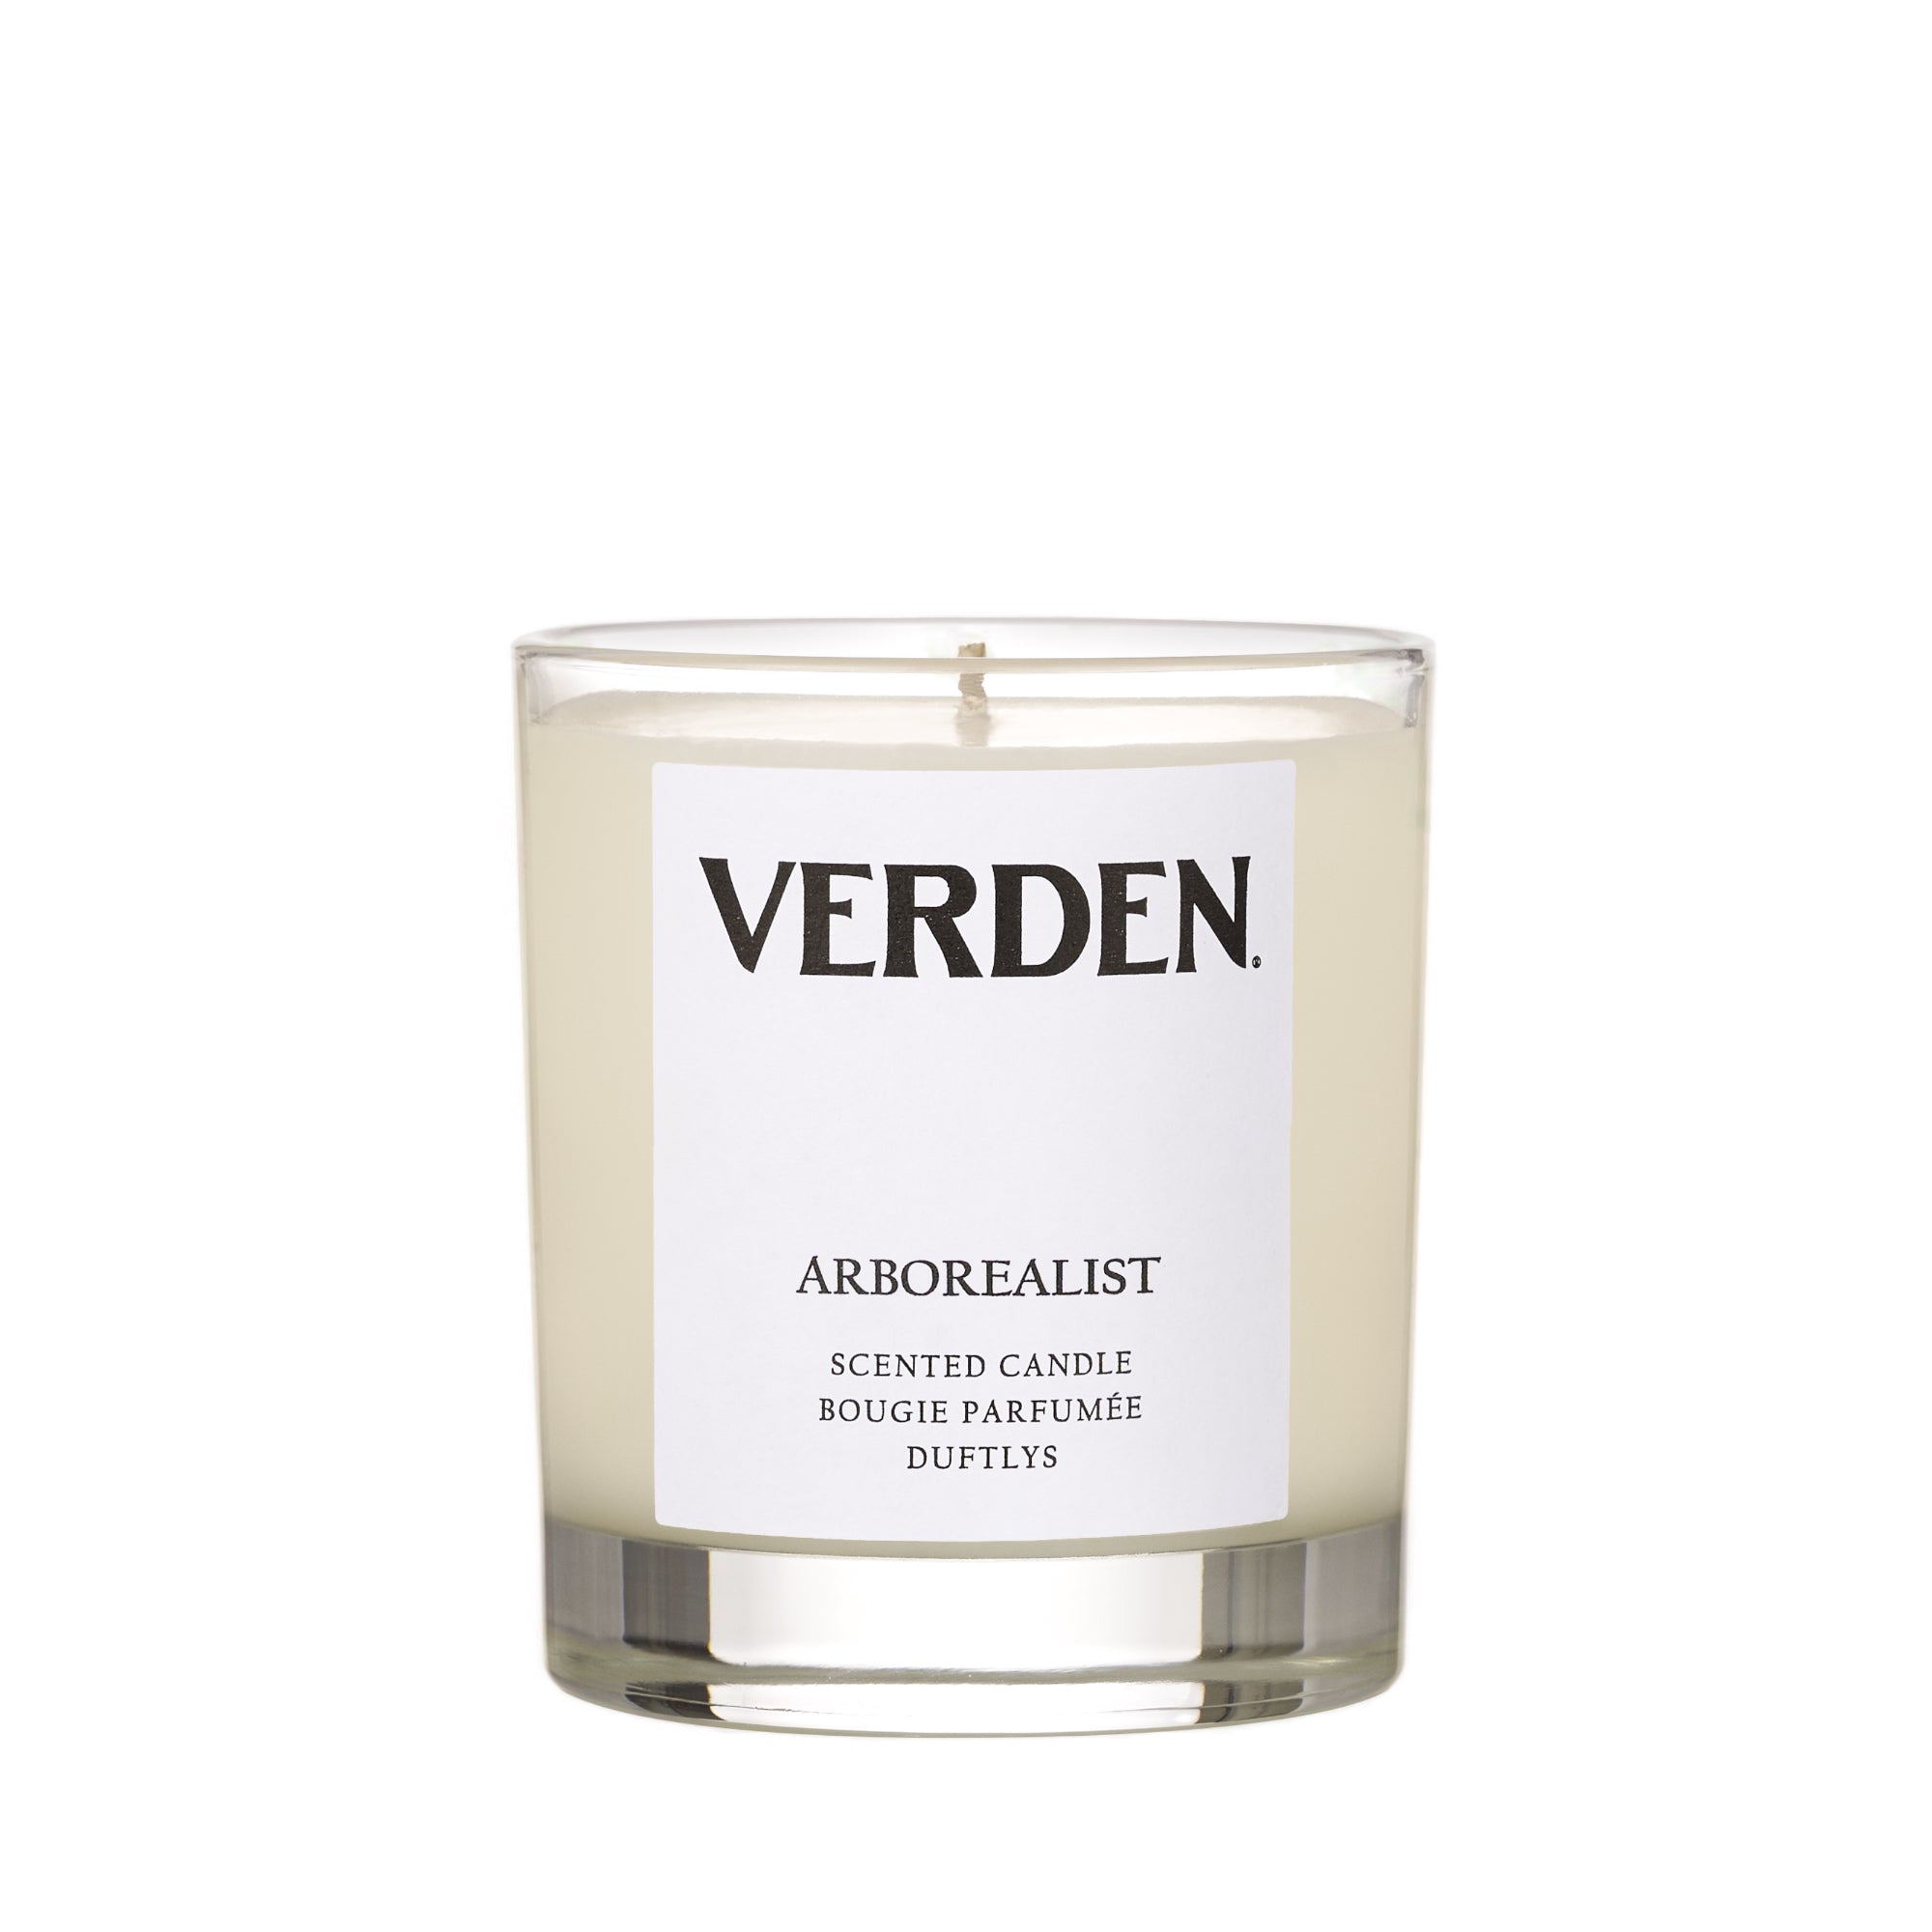 Scented Candle Arborealist